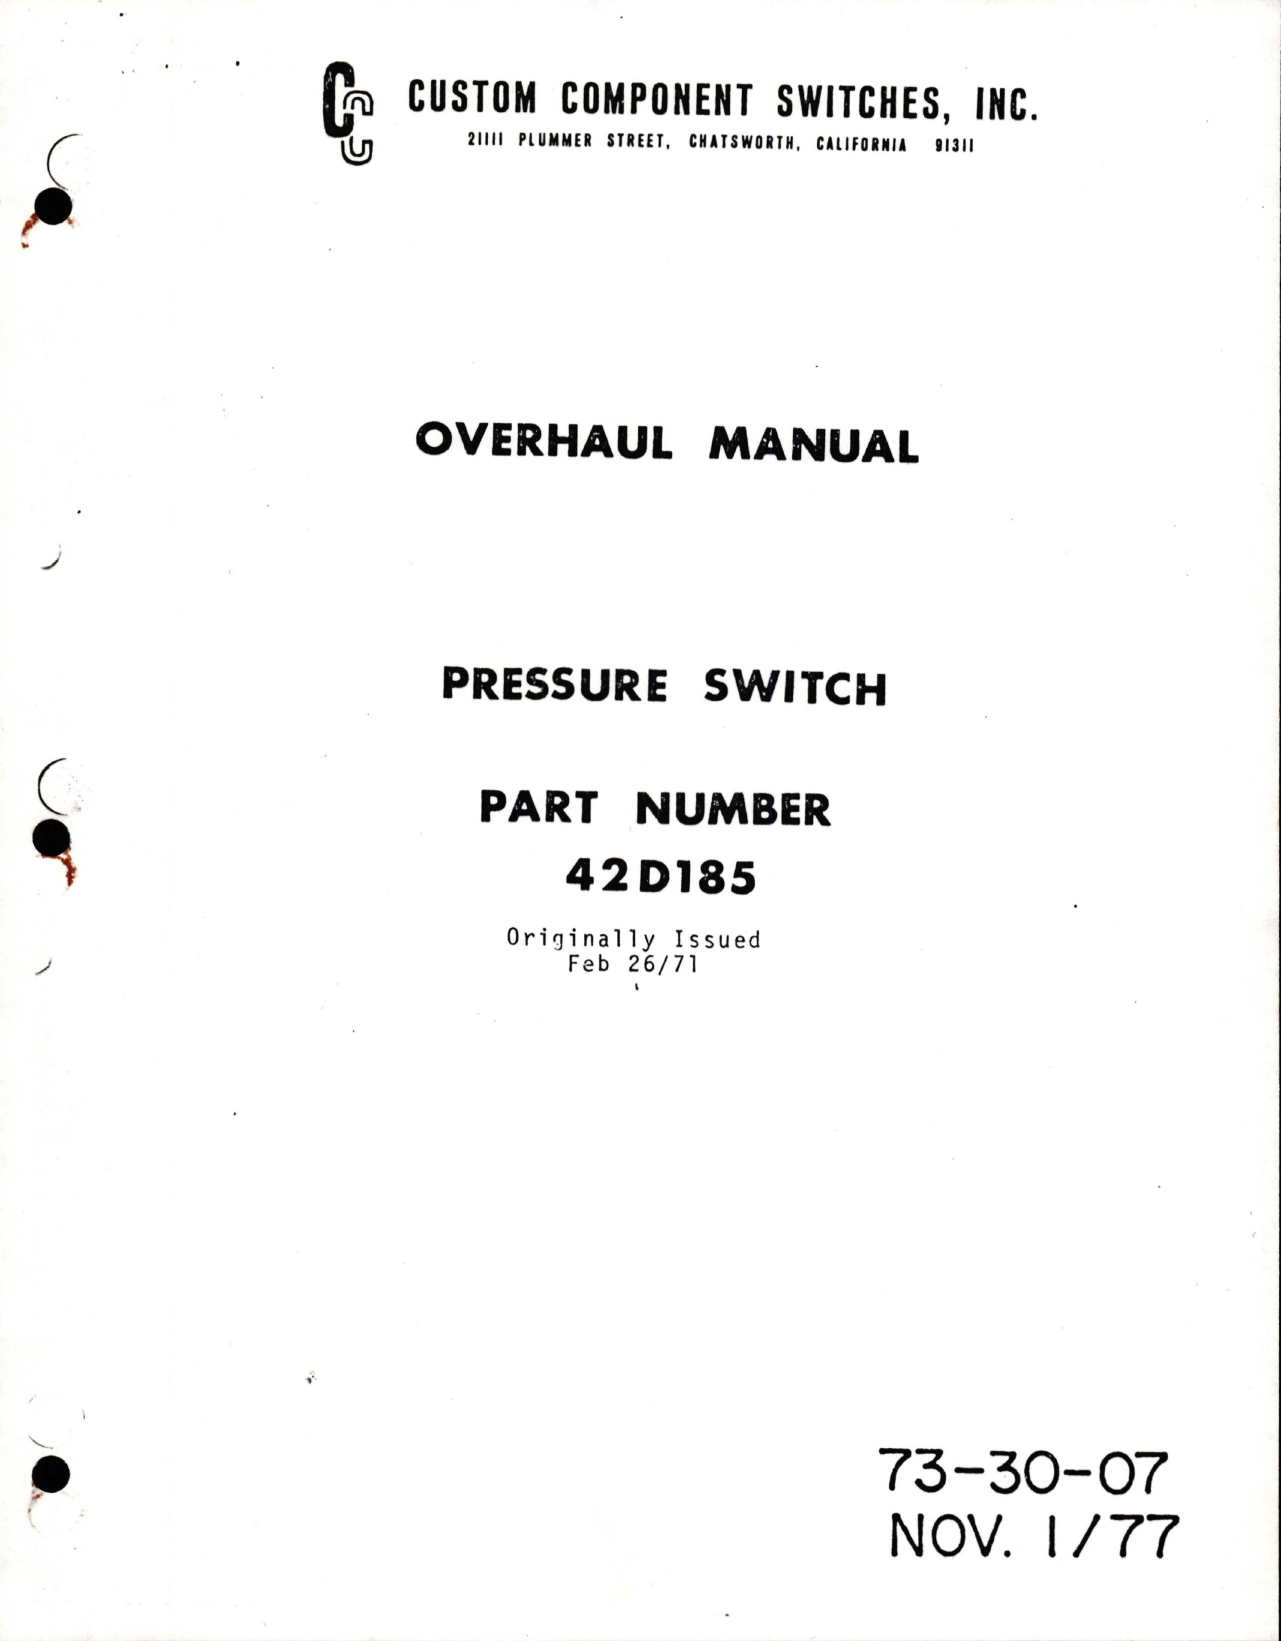 Sample page 1 from AirCorps Library document: Overhaul for Pressure Switch - Part 42D185 